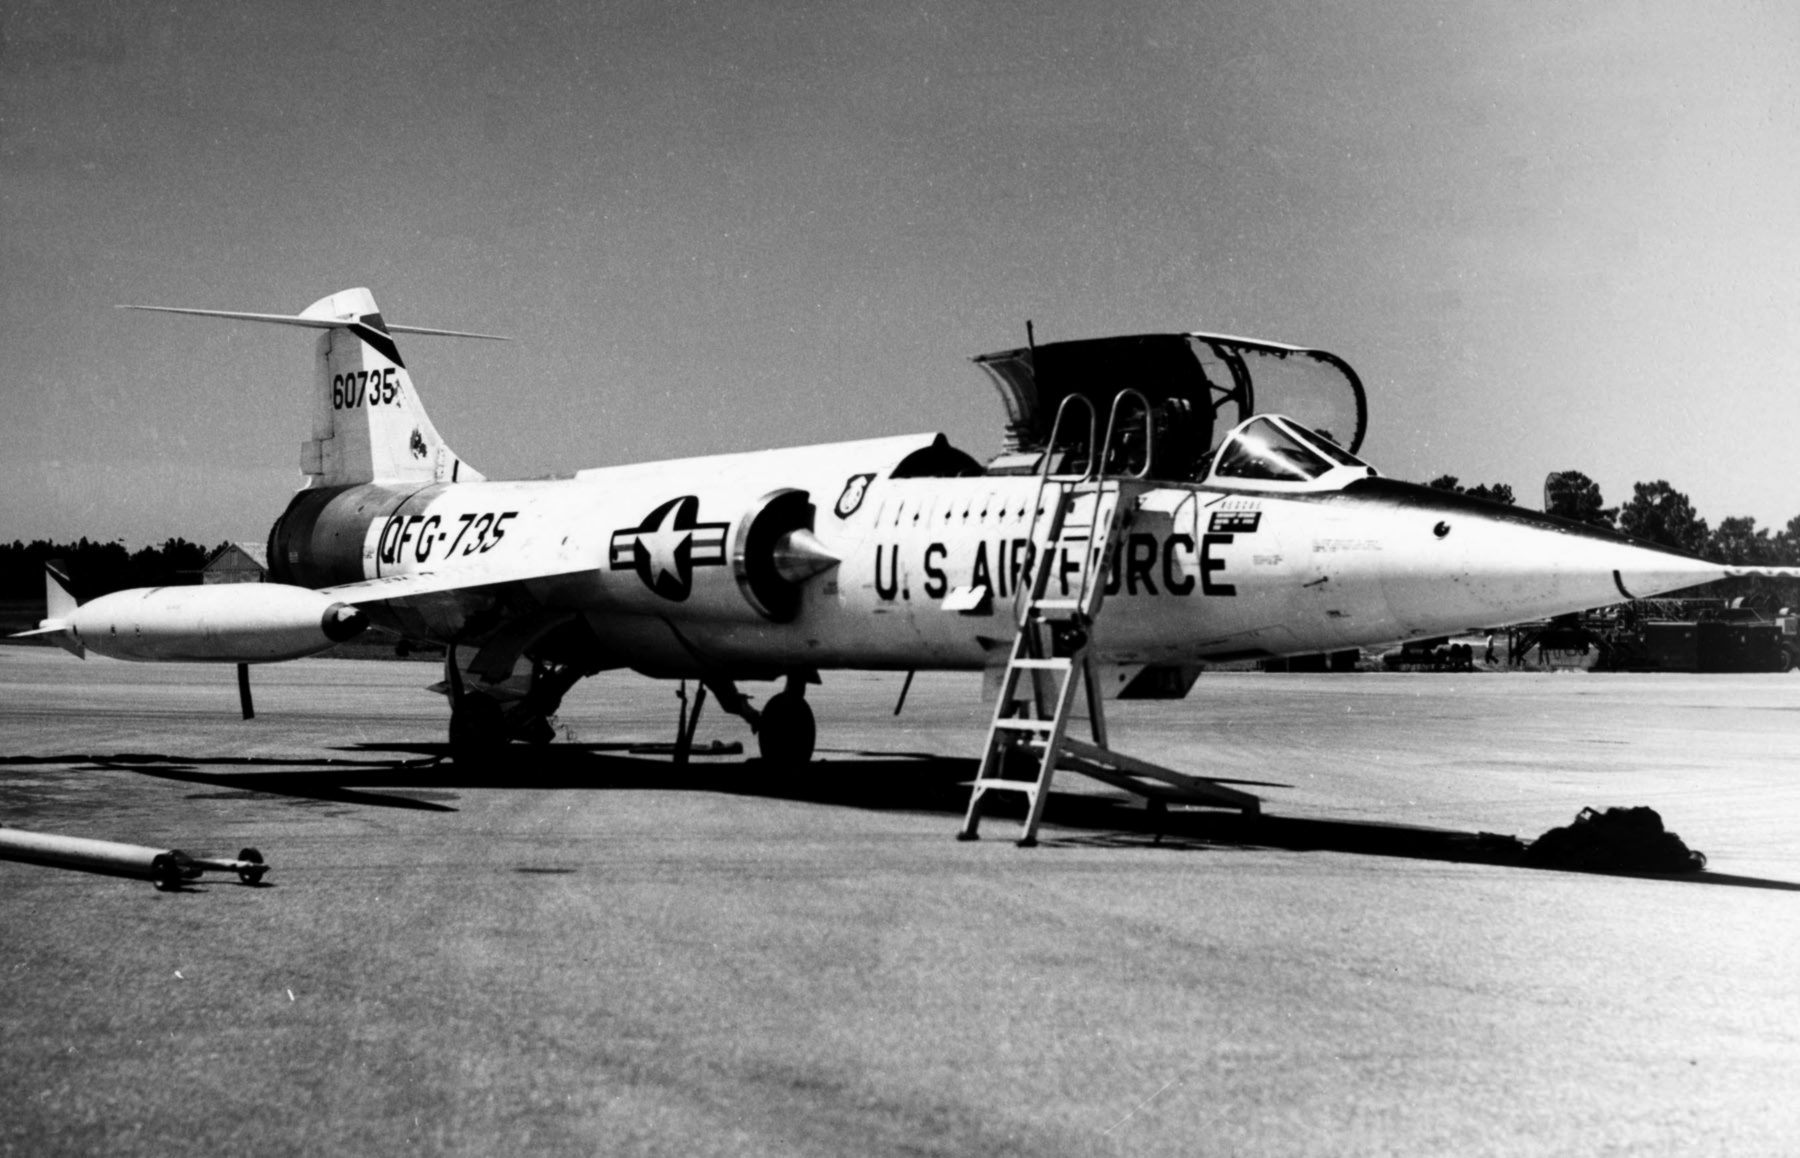 The Air Force bought less than 300 F-104s, but some became target drones.<br>(USAF)